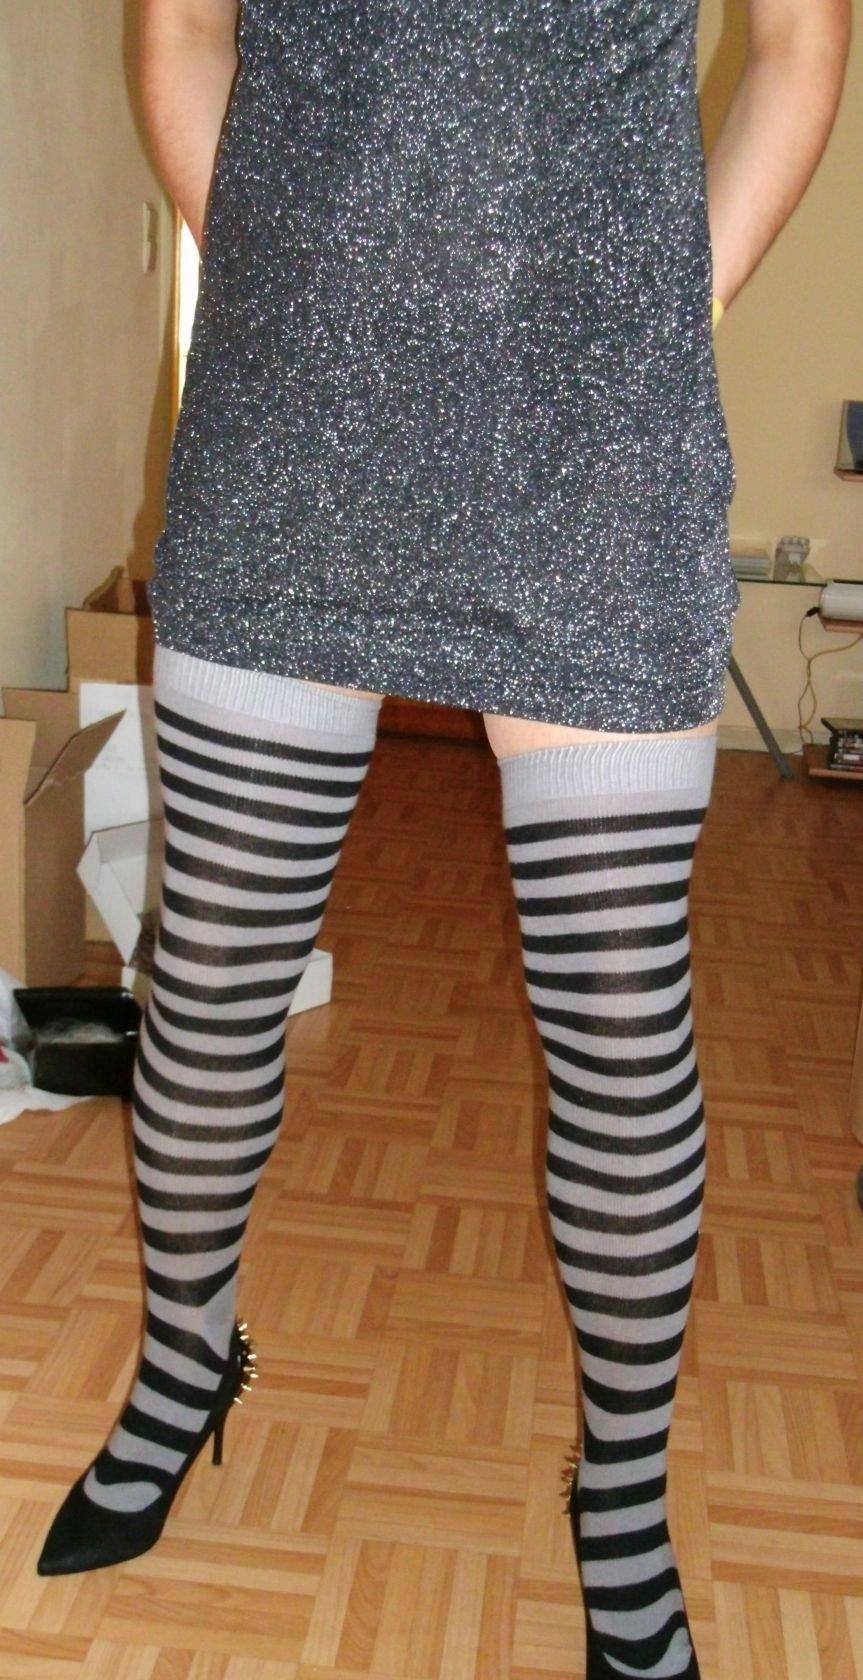 Striped Stockings and Dress 2